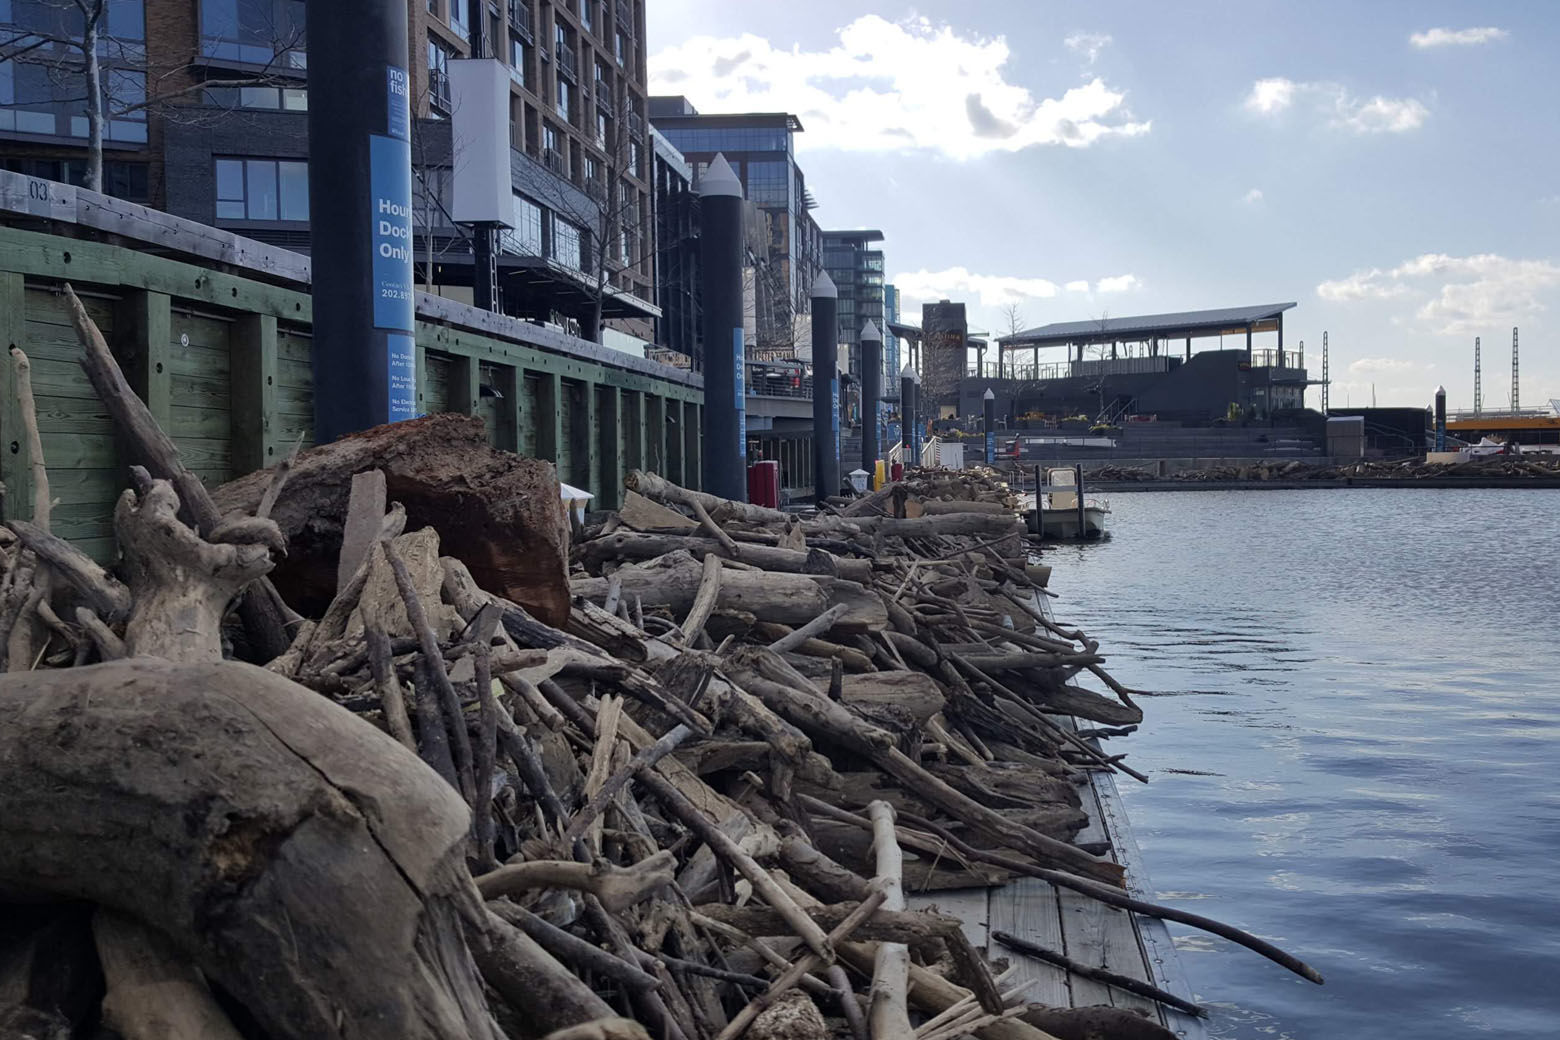 Collected debris being sorted on Wharf Cove (between Transit Pier and Market Pier) as part of The Wharf's Washington Channel Water Clean Up initiative. (Courtesy Patrick Revord)